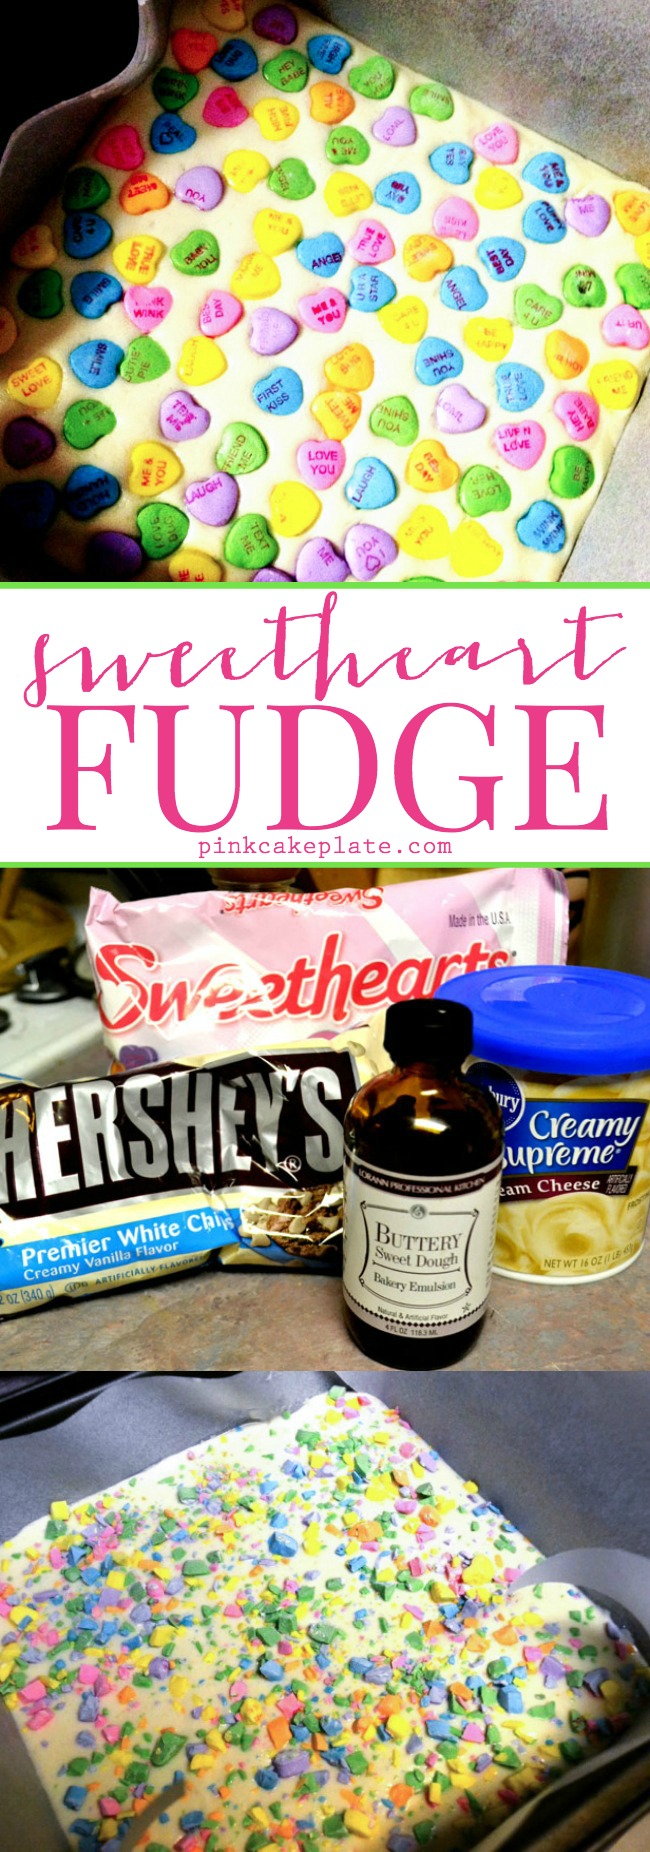 Sweetheart Fudge - easy and delicious fudge that's perfect for Valentine's Day!